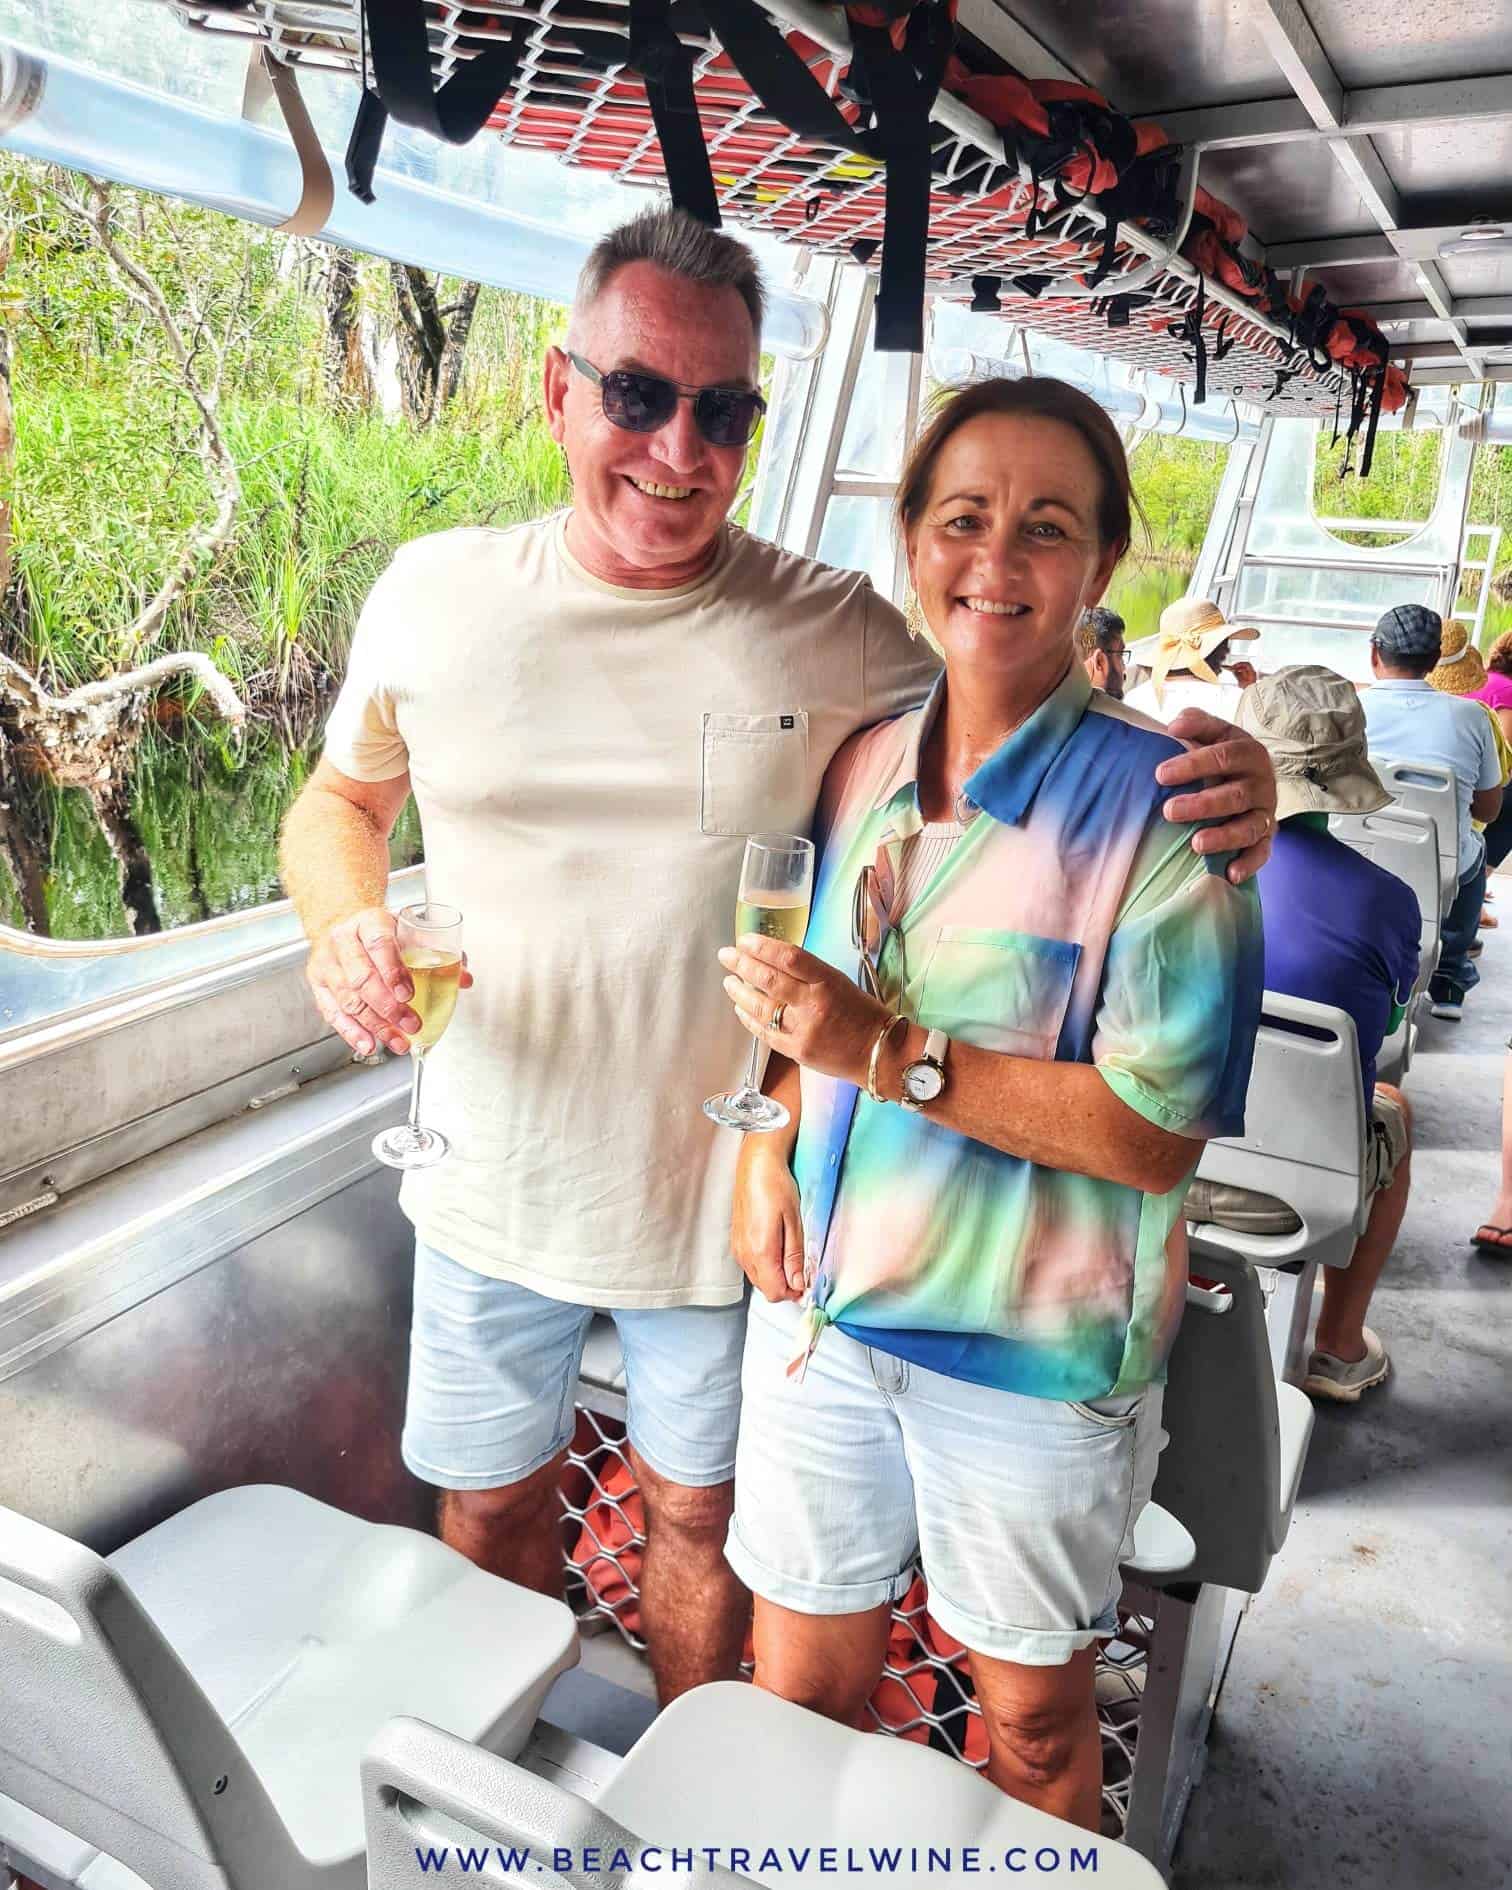 Best things to do in Sunshine Coast Australia - Leanne and Lyle McCabe on an everglades boat